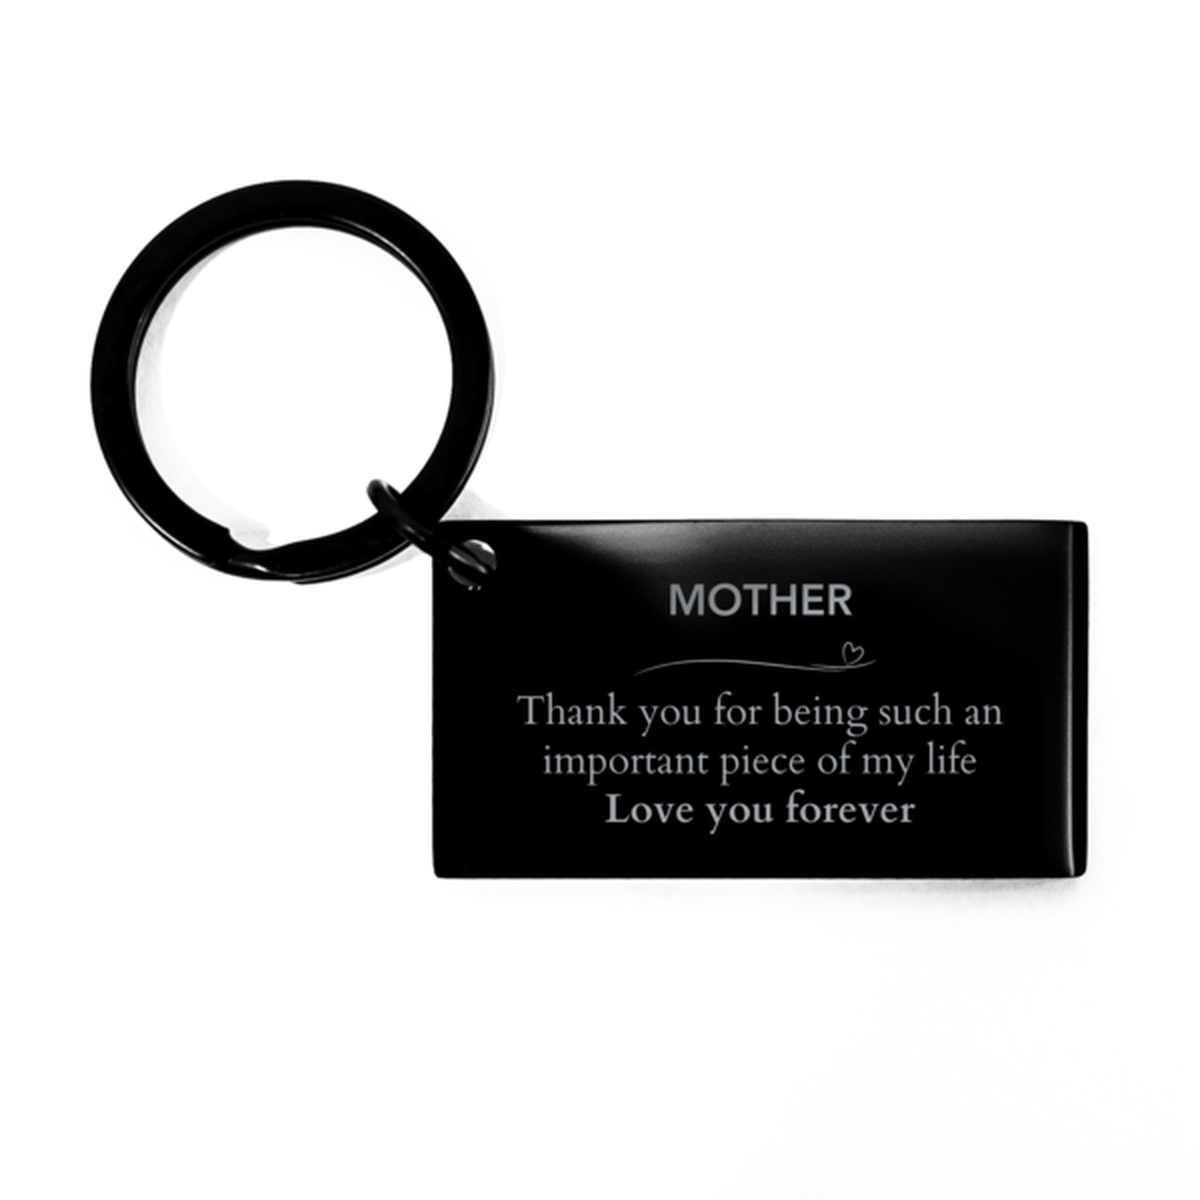 Appropriate Mother Keychain Epic Birthday Gifts for Mother Thank you for being such an important piece of my life Mother Christmas Mothers Fathers Day